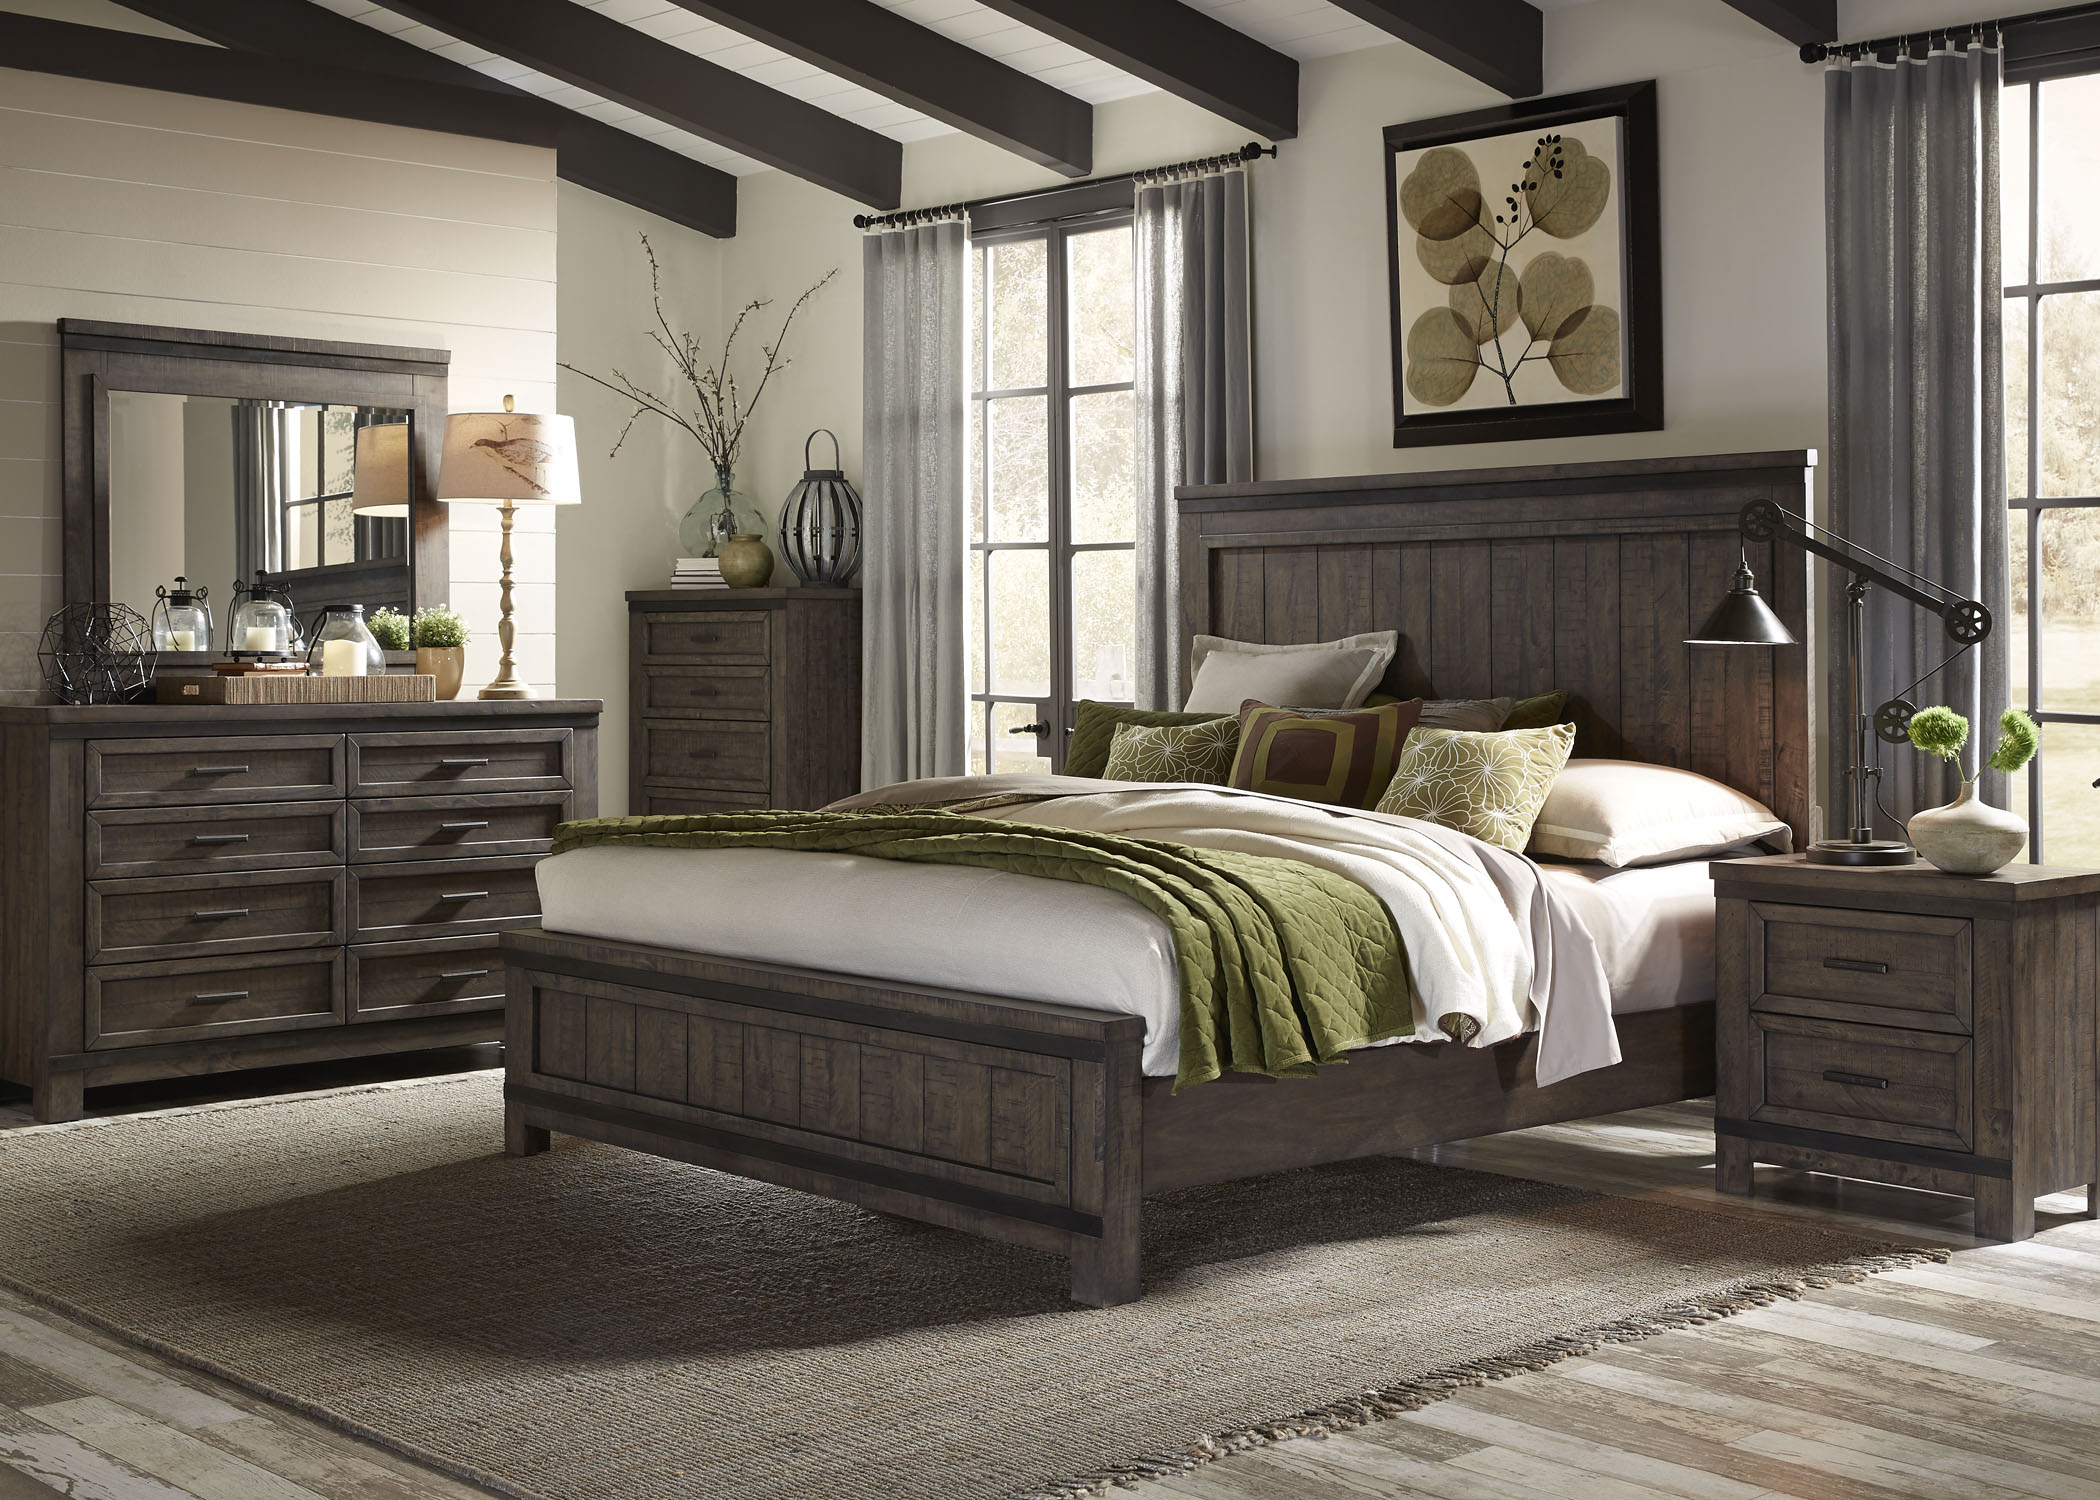 Liberty Furniture Thornwood Hills Bedroom King Panel Bed, Dresser, Mirror, and Night Stand Collection